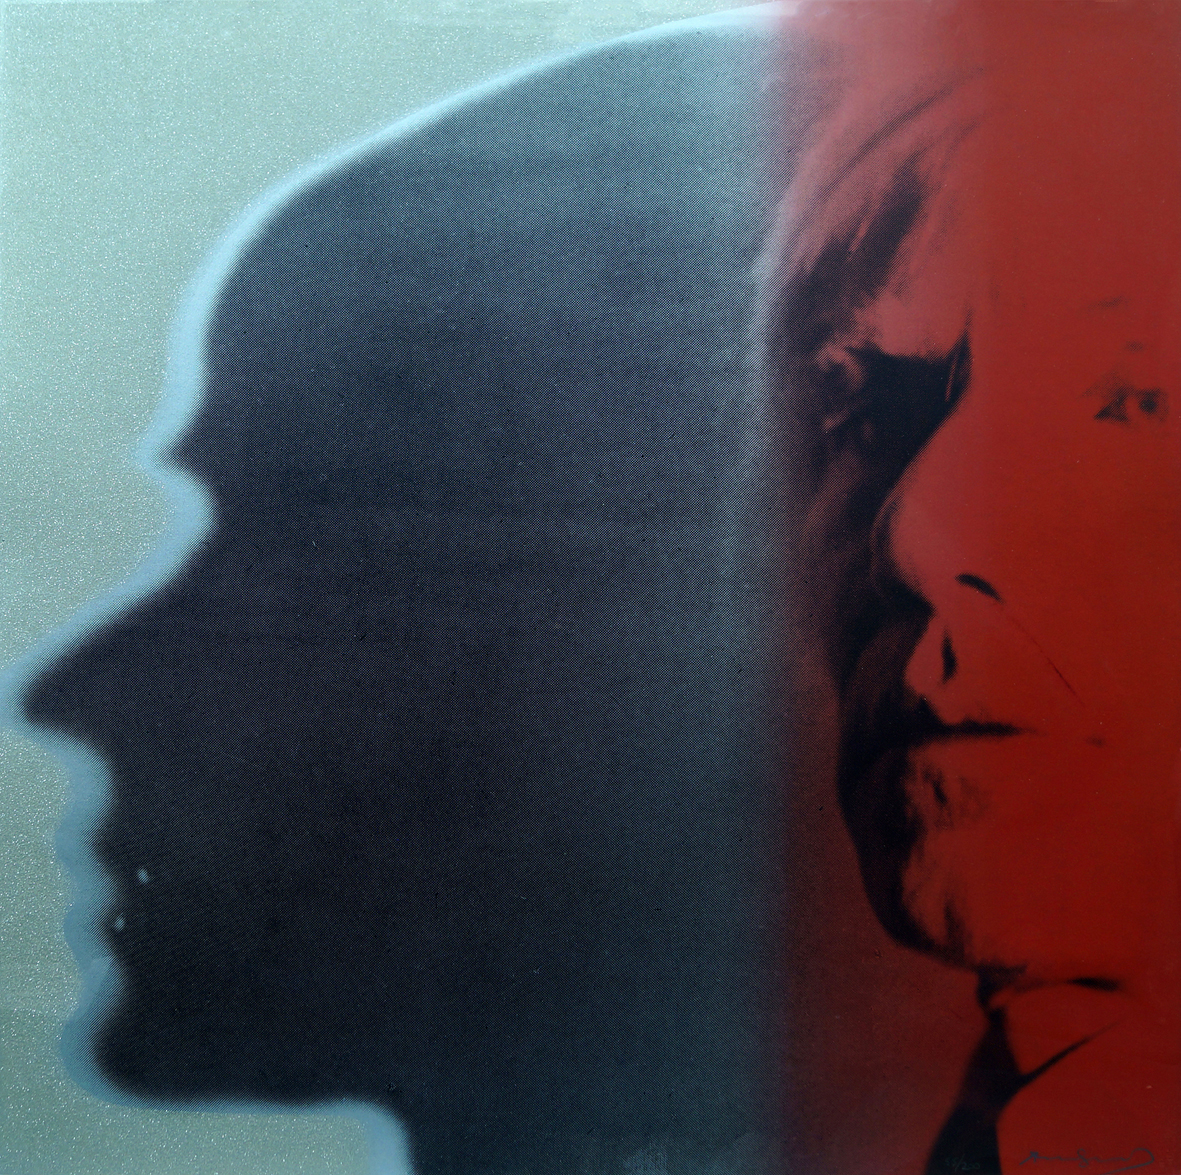 The 1981 screenprint in colors titled 'The Shadow' is a self-portrait belonging to the Myth series of 10 screenprints that exemplify Warhol's sense of the powerful motifs of his time. Roseberys London images